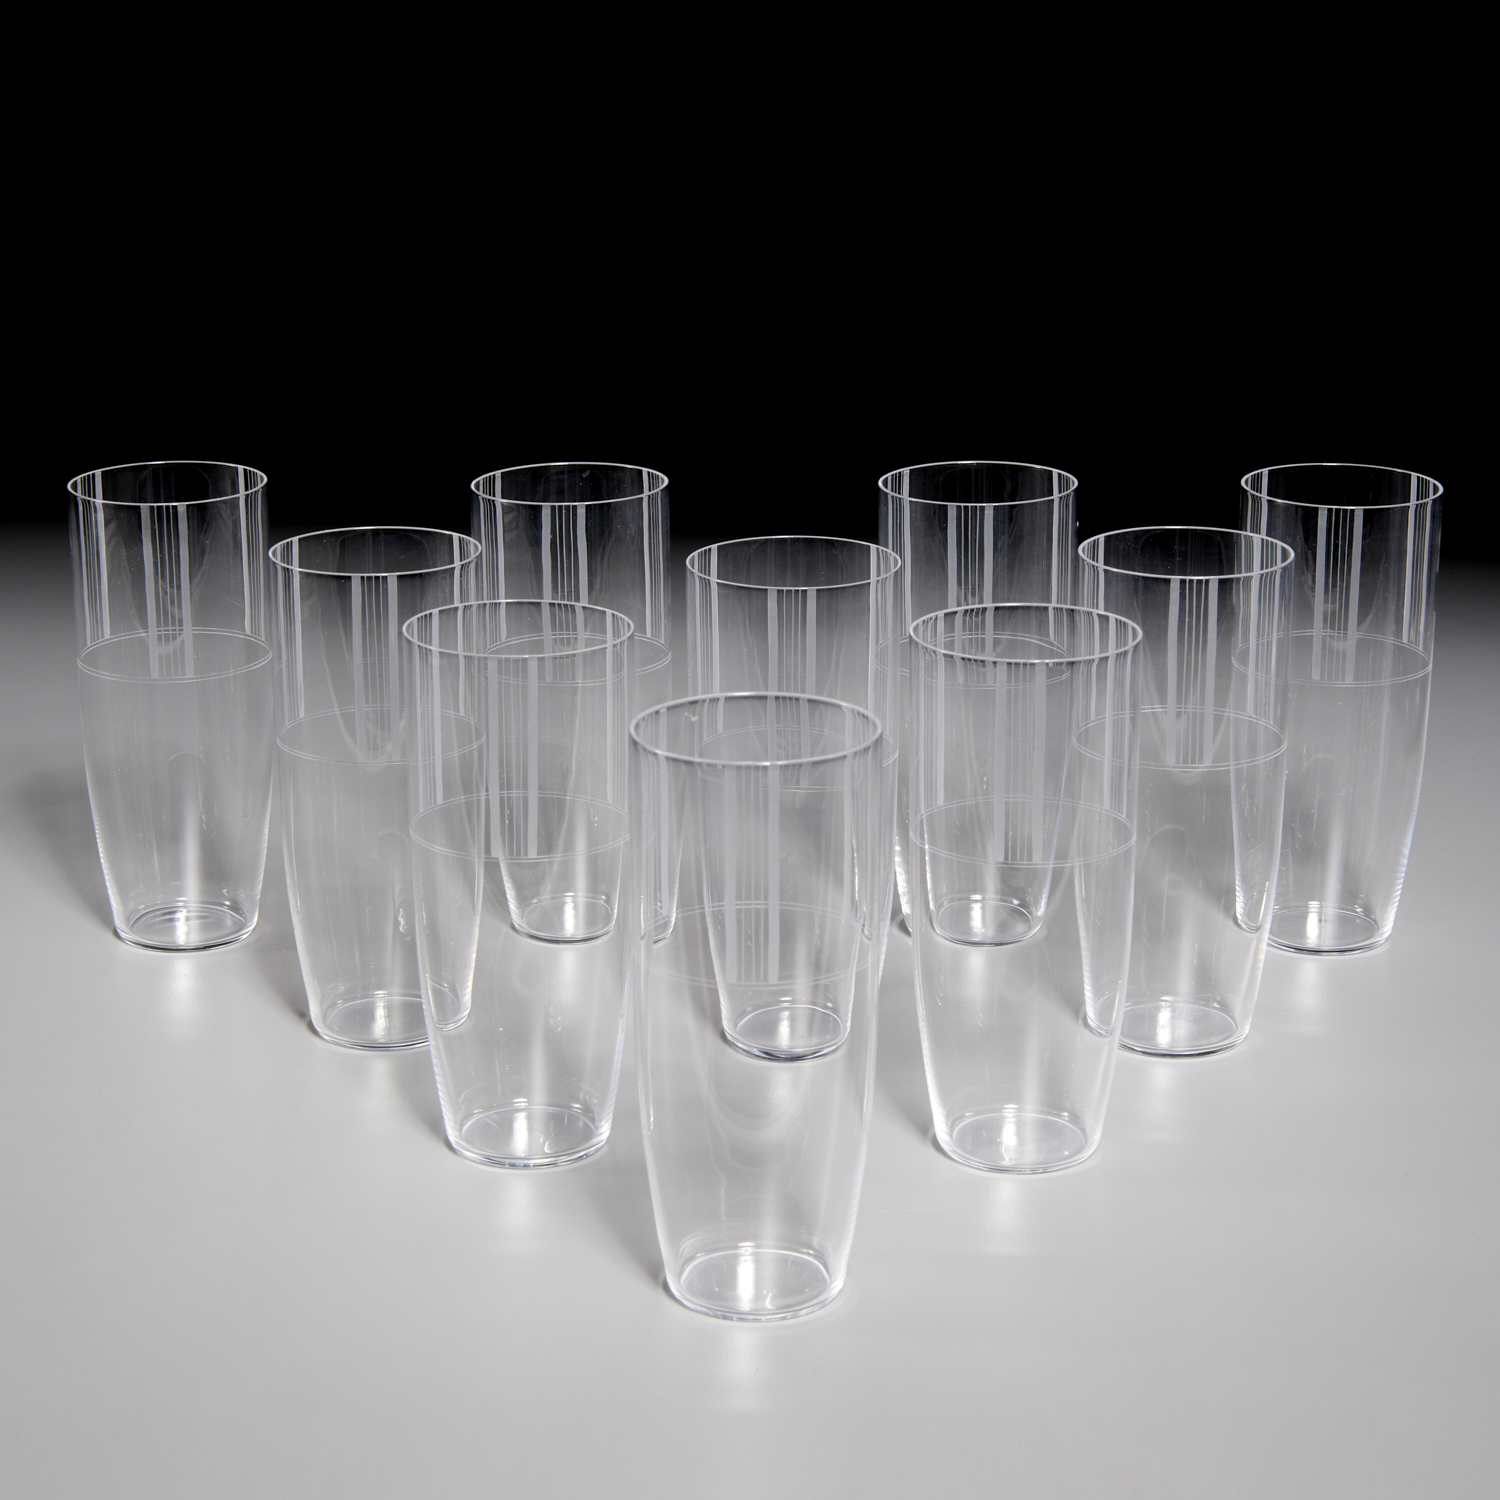 Mikasa “Cheers” Etched Shot Glasses Set/5 /hg – Pathway Market GR